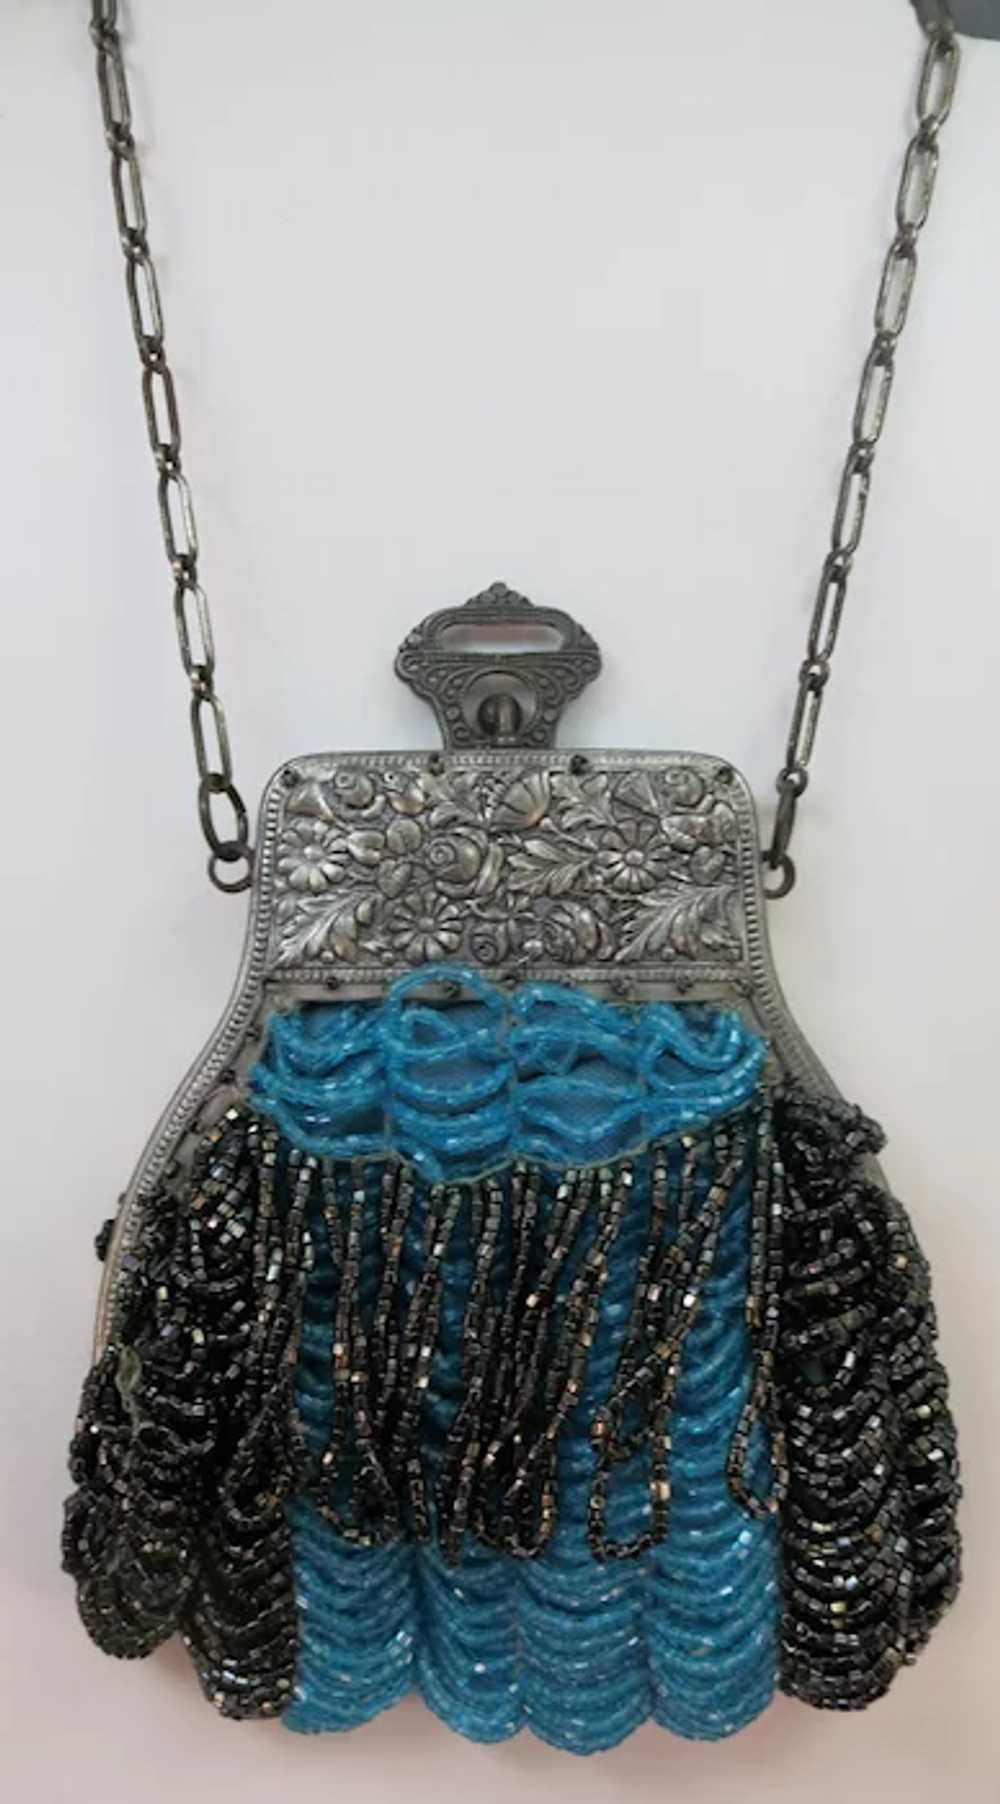 VICTORIAN Silver Colored Frame Beaded Purse - image 7